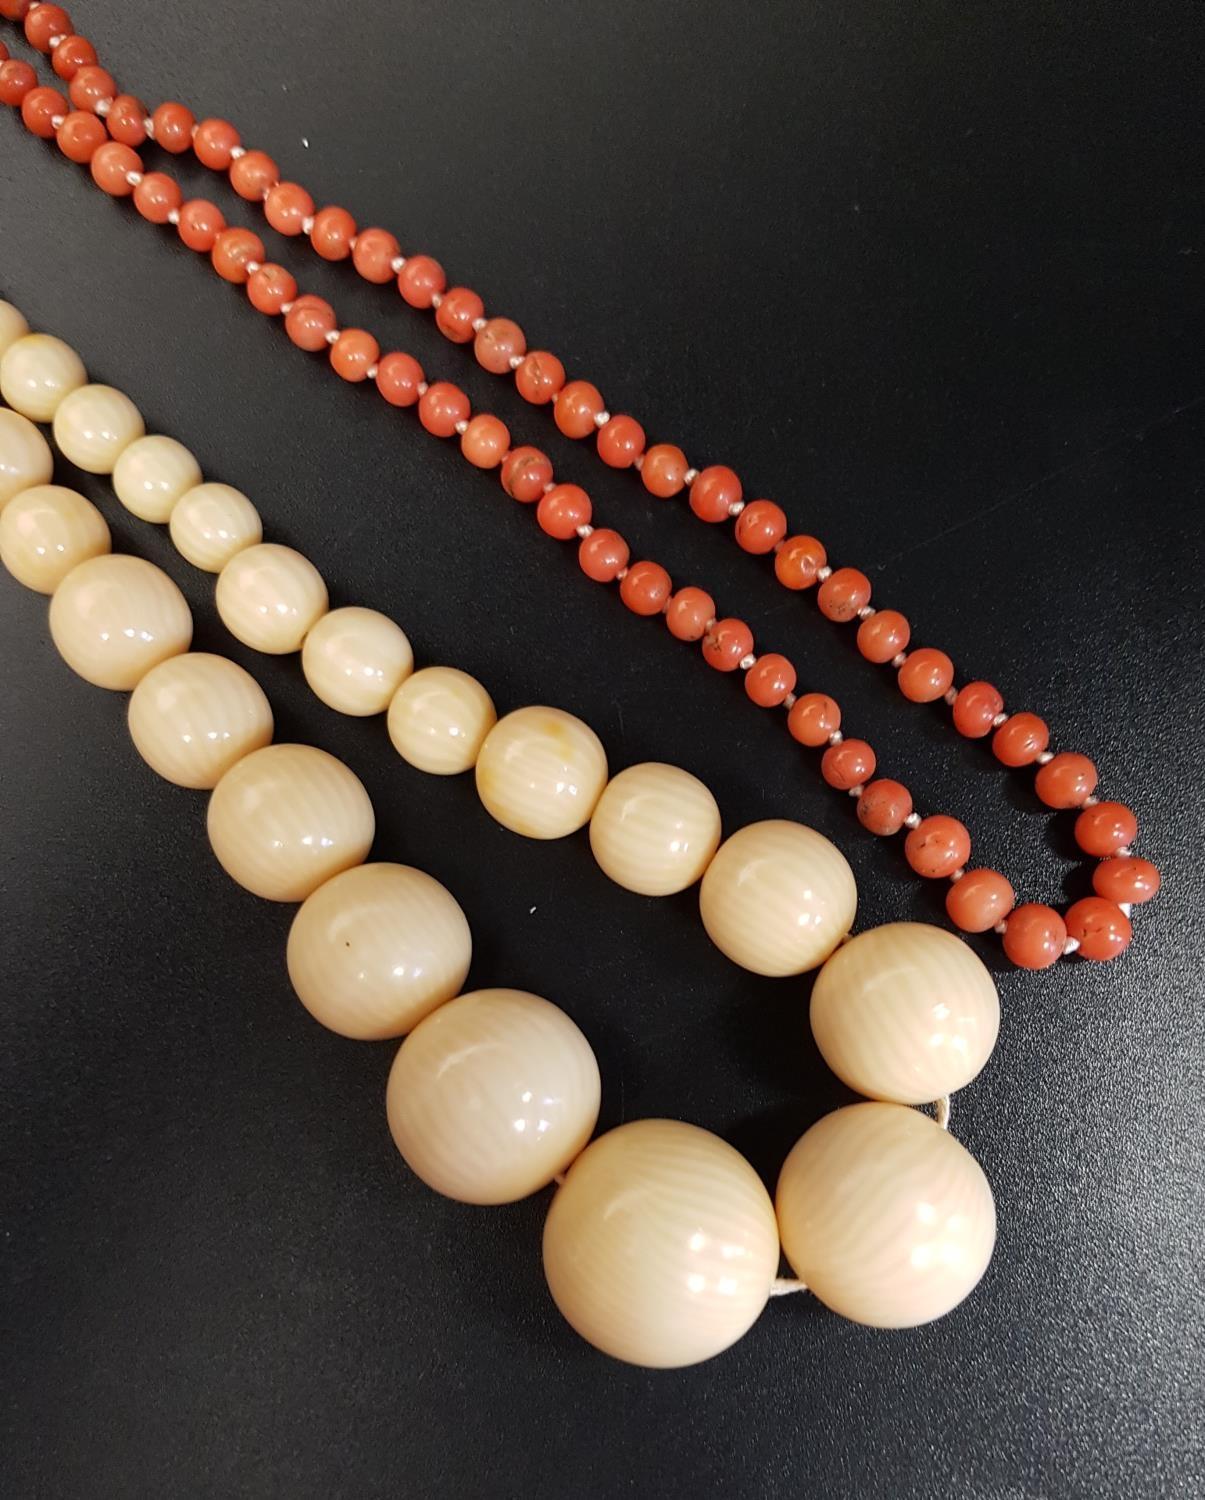 GRADUATED IVORY BEAD NECKLACE 49cmlong; together with a coral bead necklace, 55cm long (2)